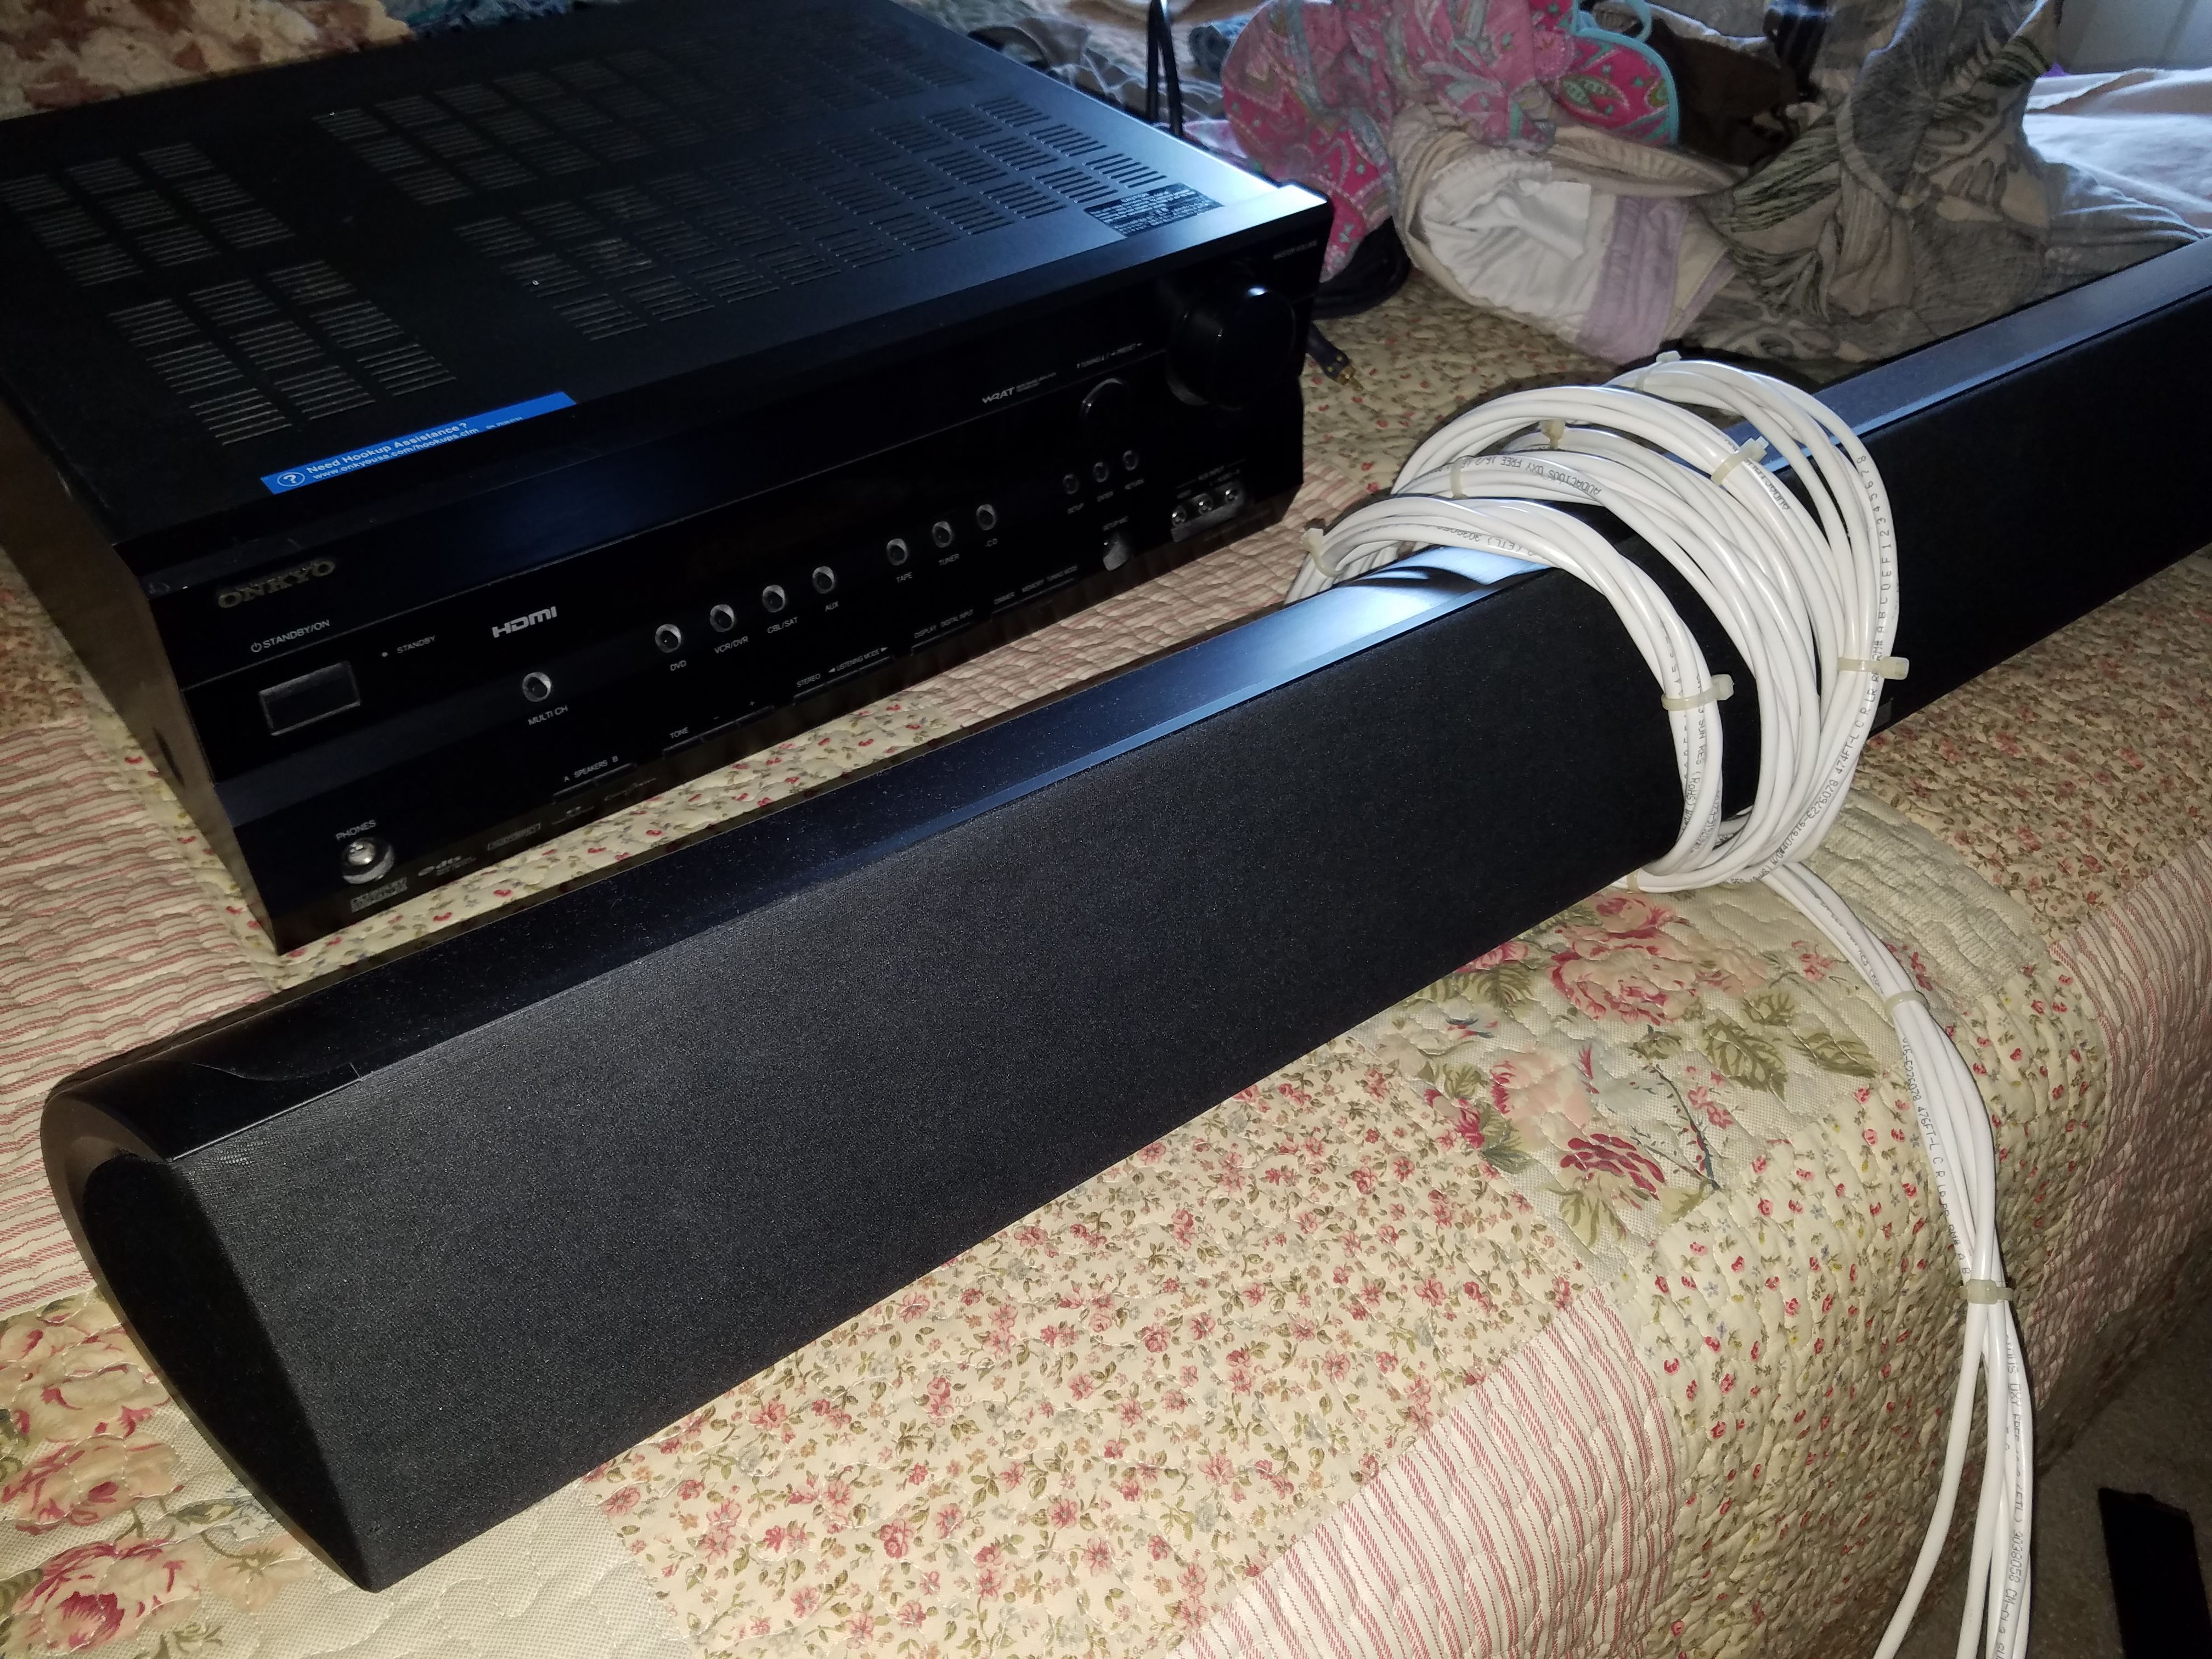 Like New Onkyo TX-SR505 Reciever, coupled with a Polk Audio Soundbar and bookshelf speaker (woofer. Receiver is 7.1 channels and 160 watts.